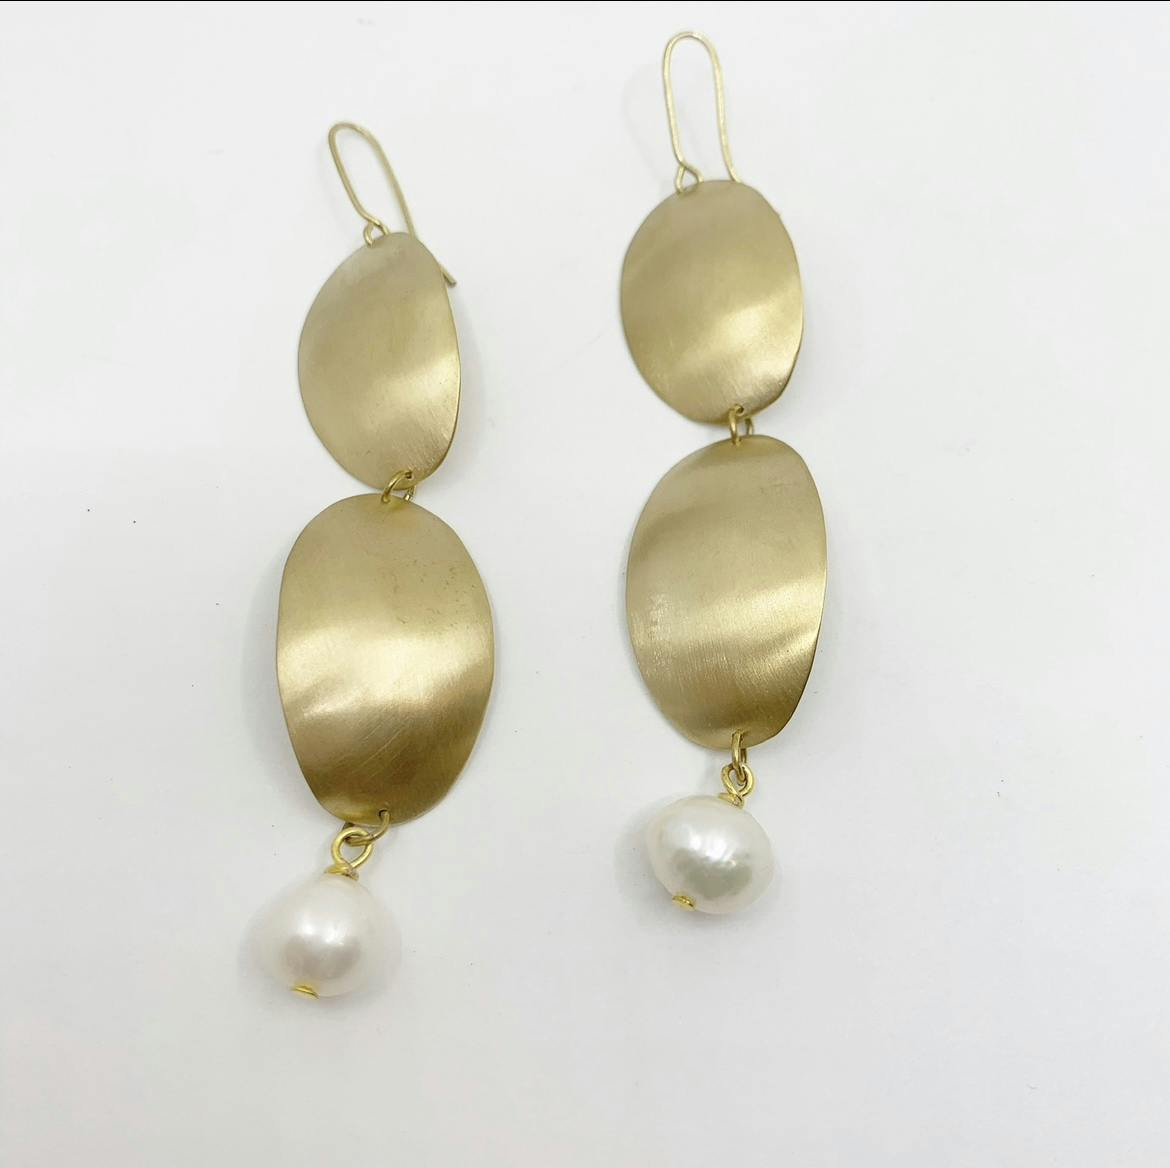 Reign Pearl Earrings, a product by Jenny Greco Jewellery